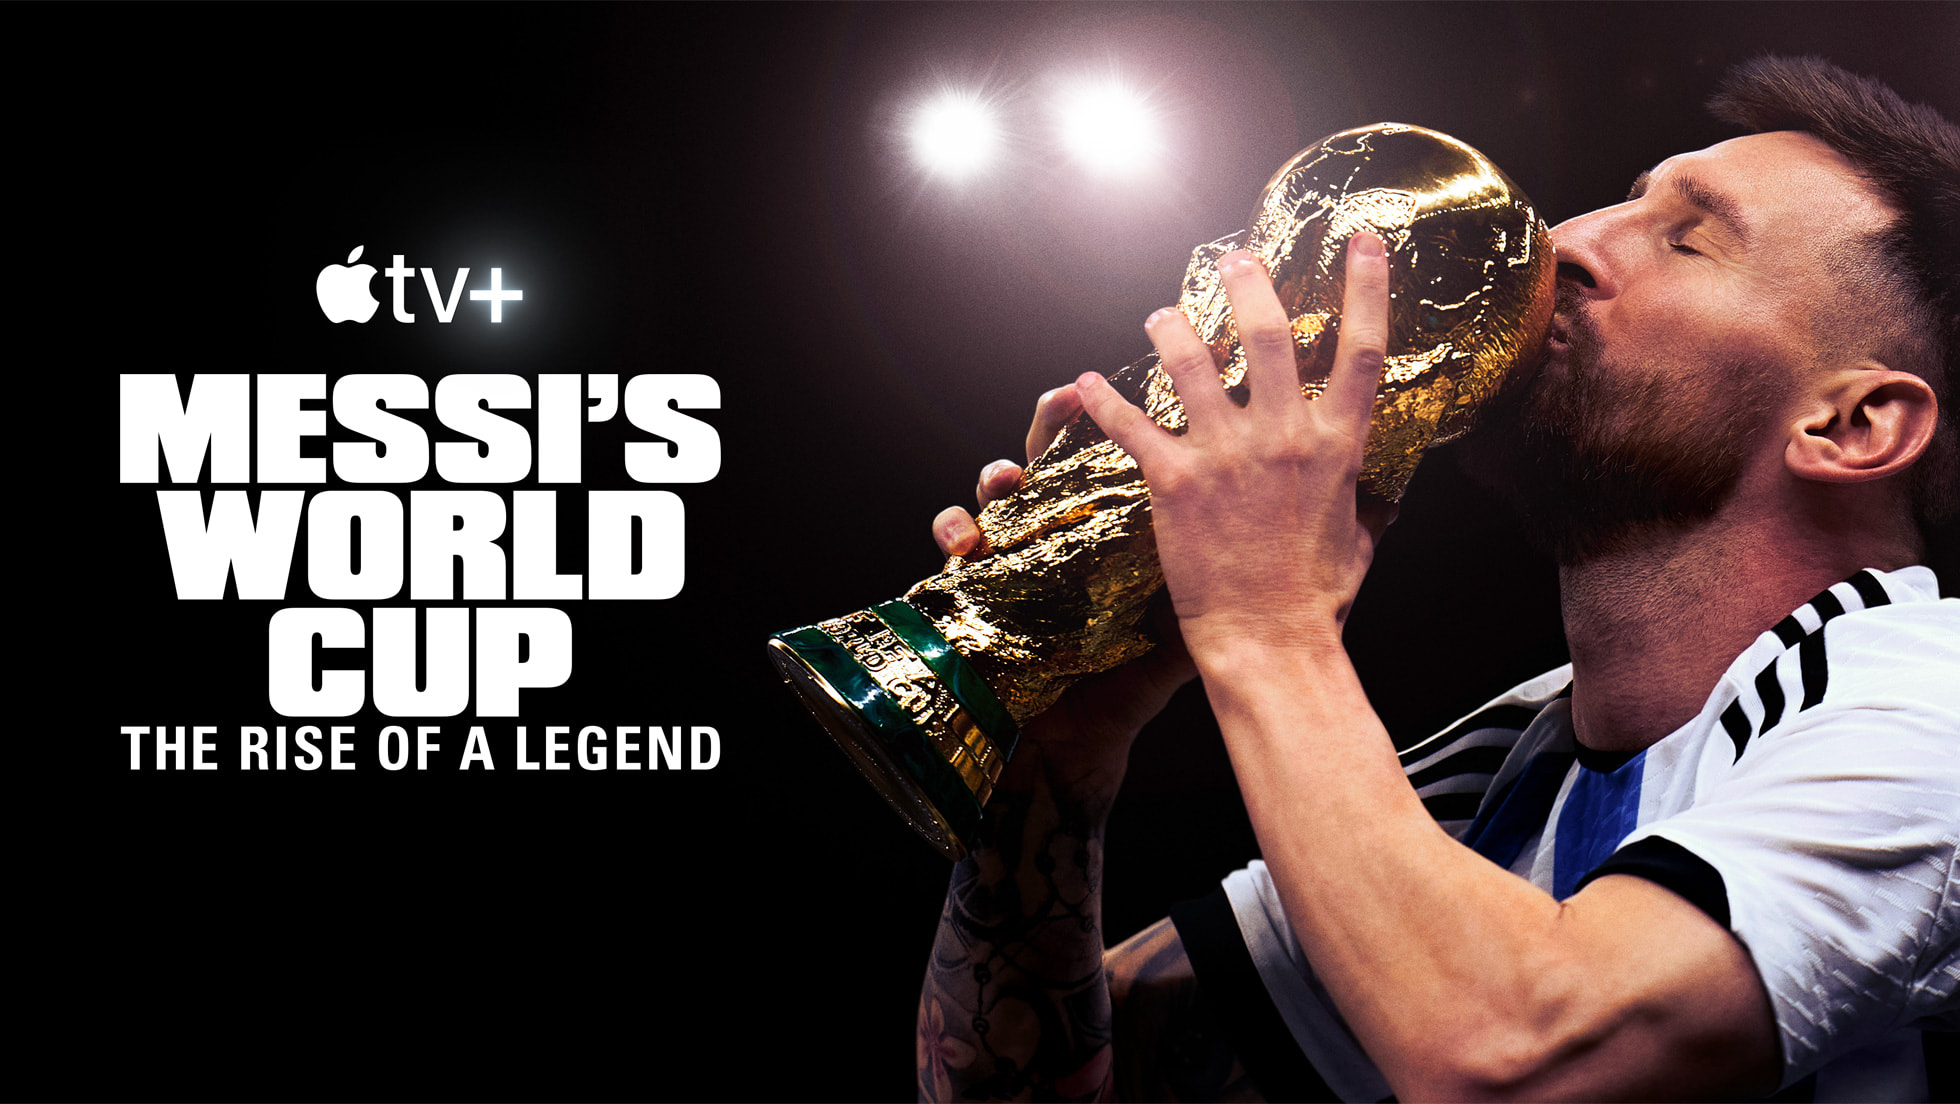 New trailer for “Messi’s World Cup: The Rise of a Legend" released - premiering February 21, 2024